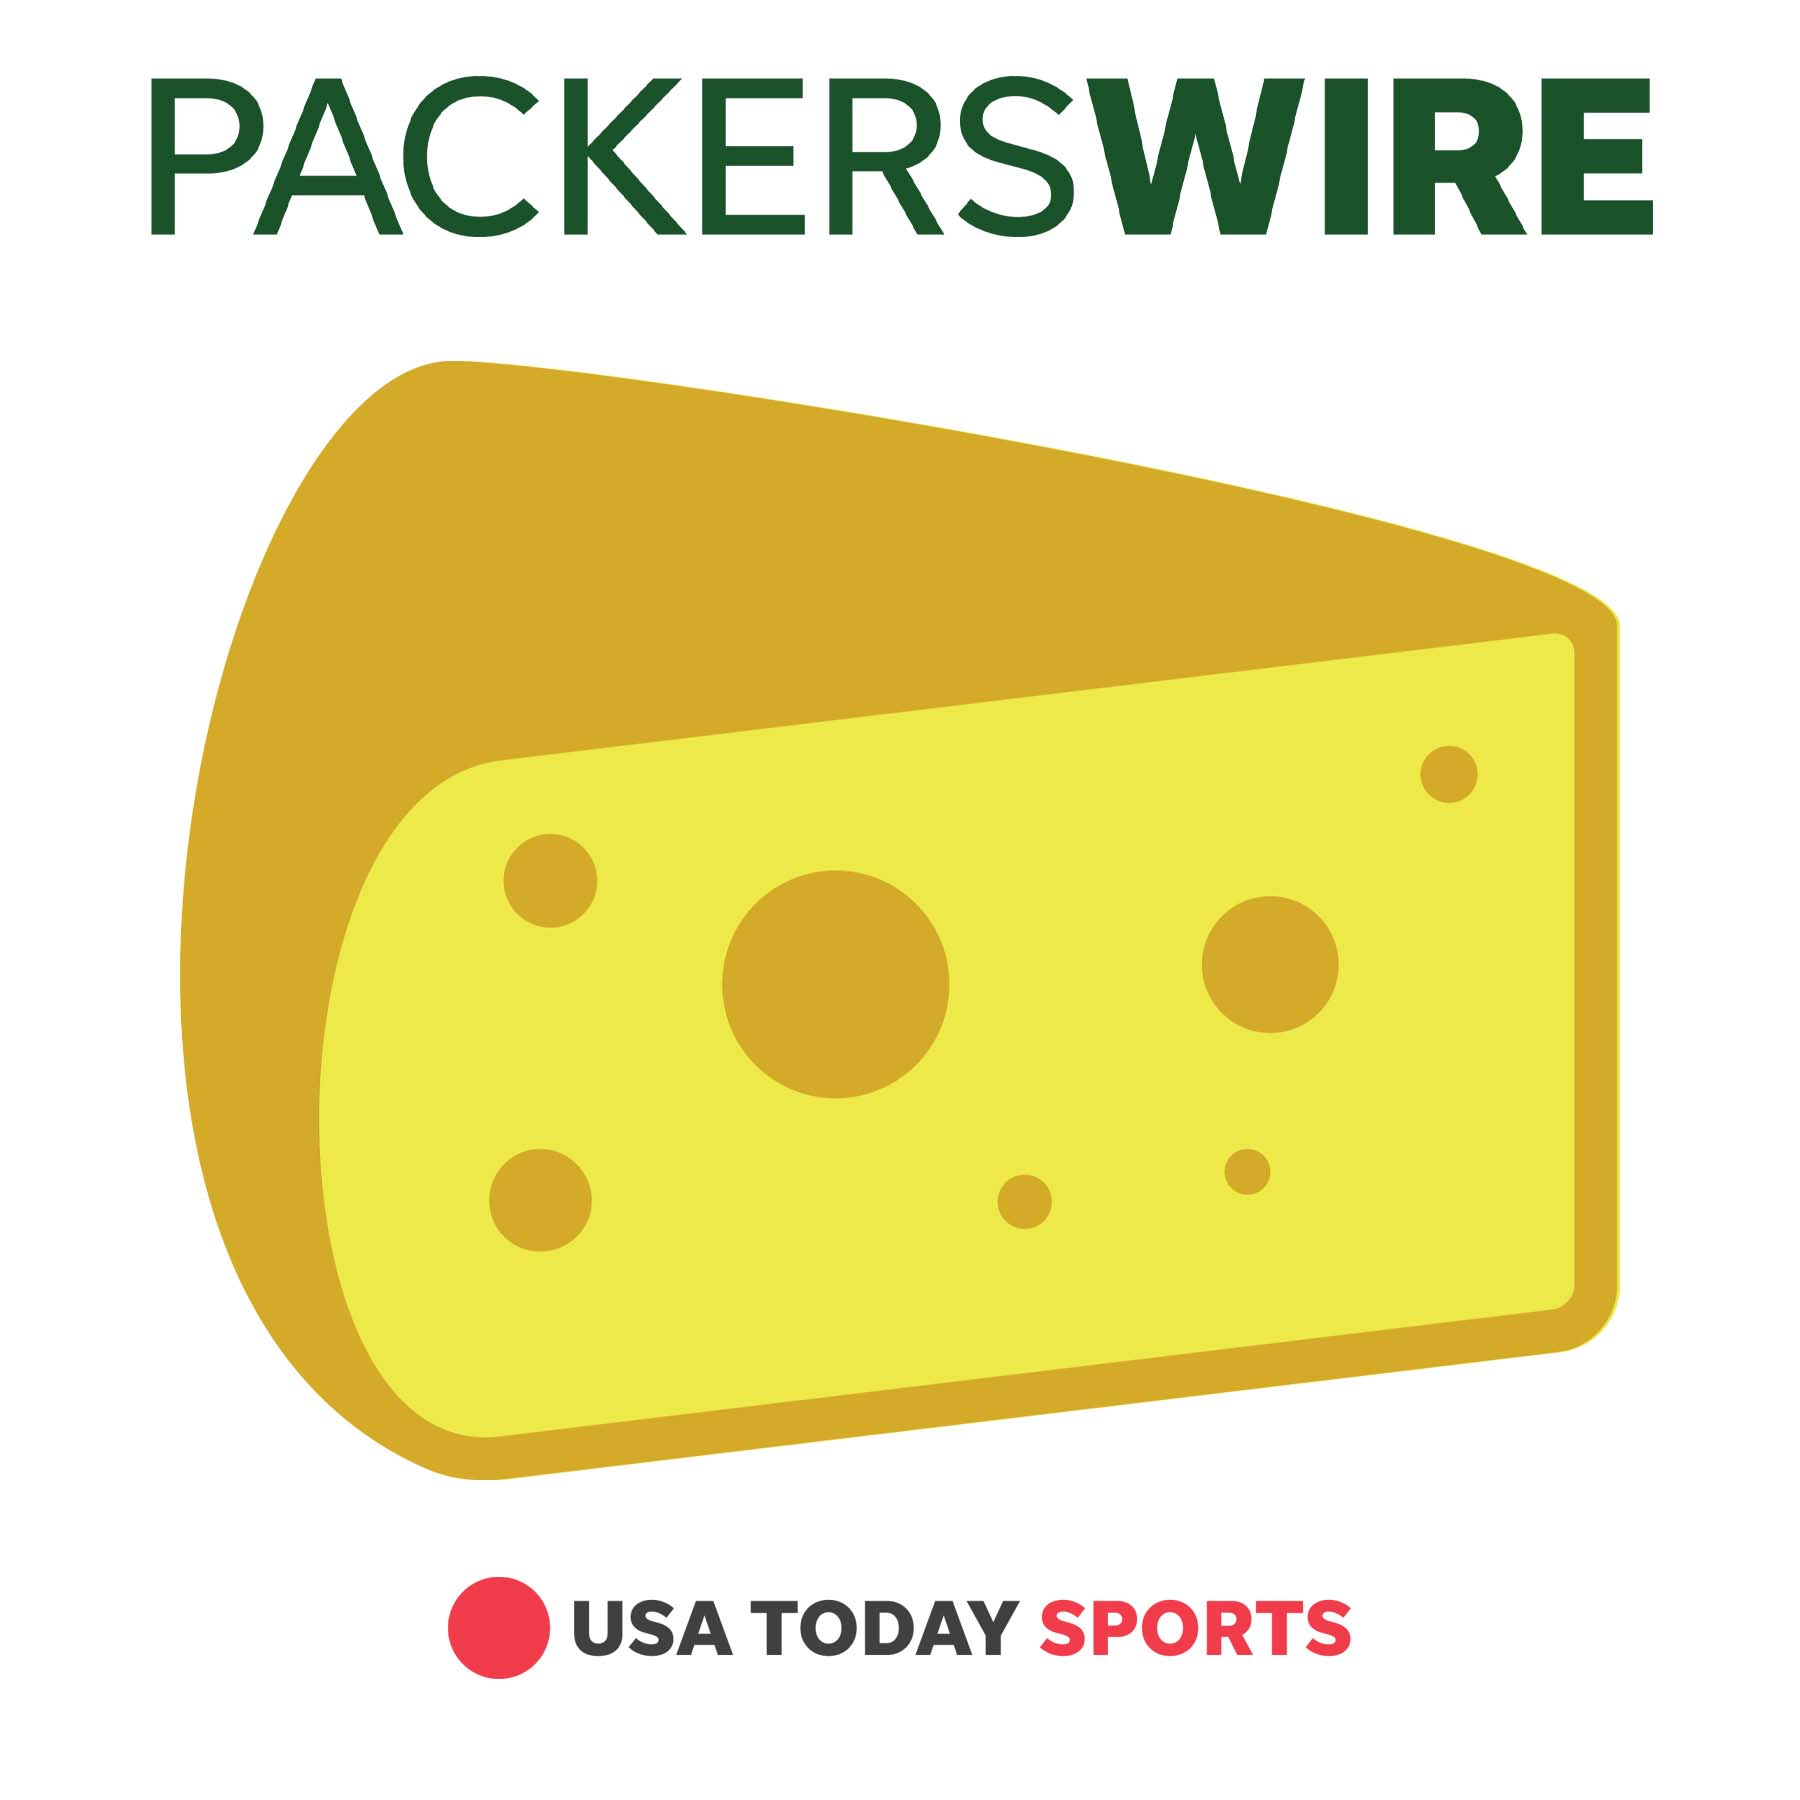 Packers are proving they have a championship-level defense